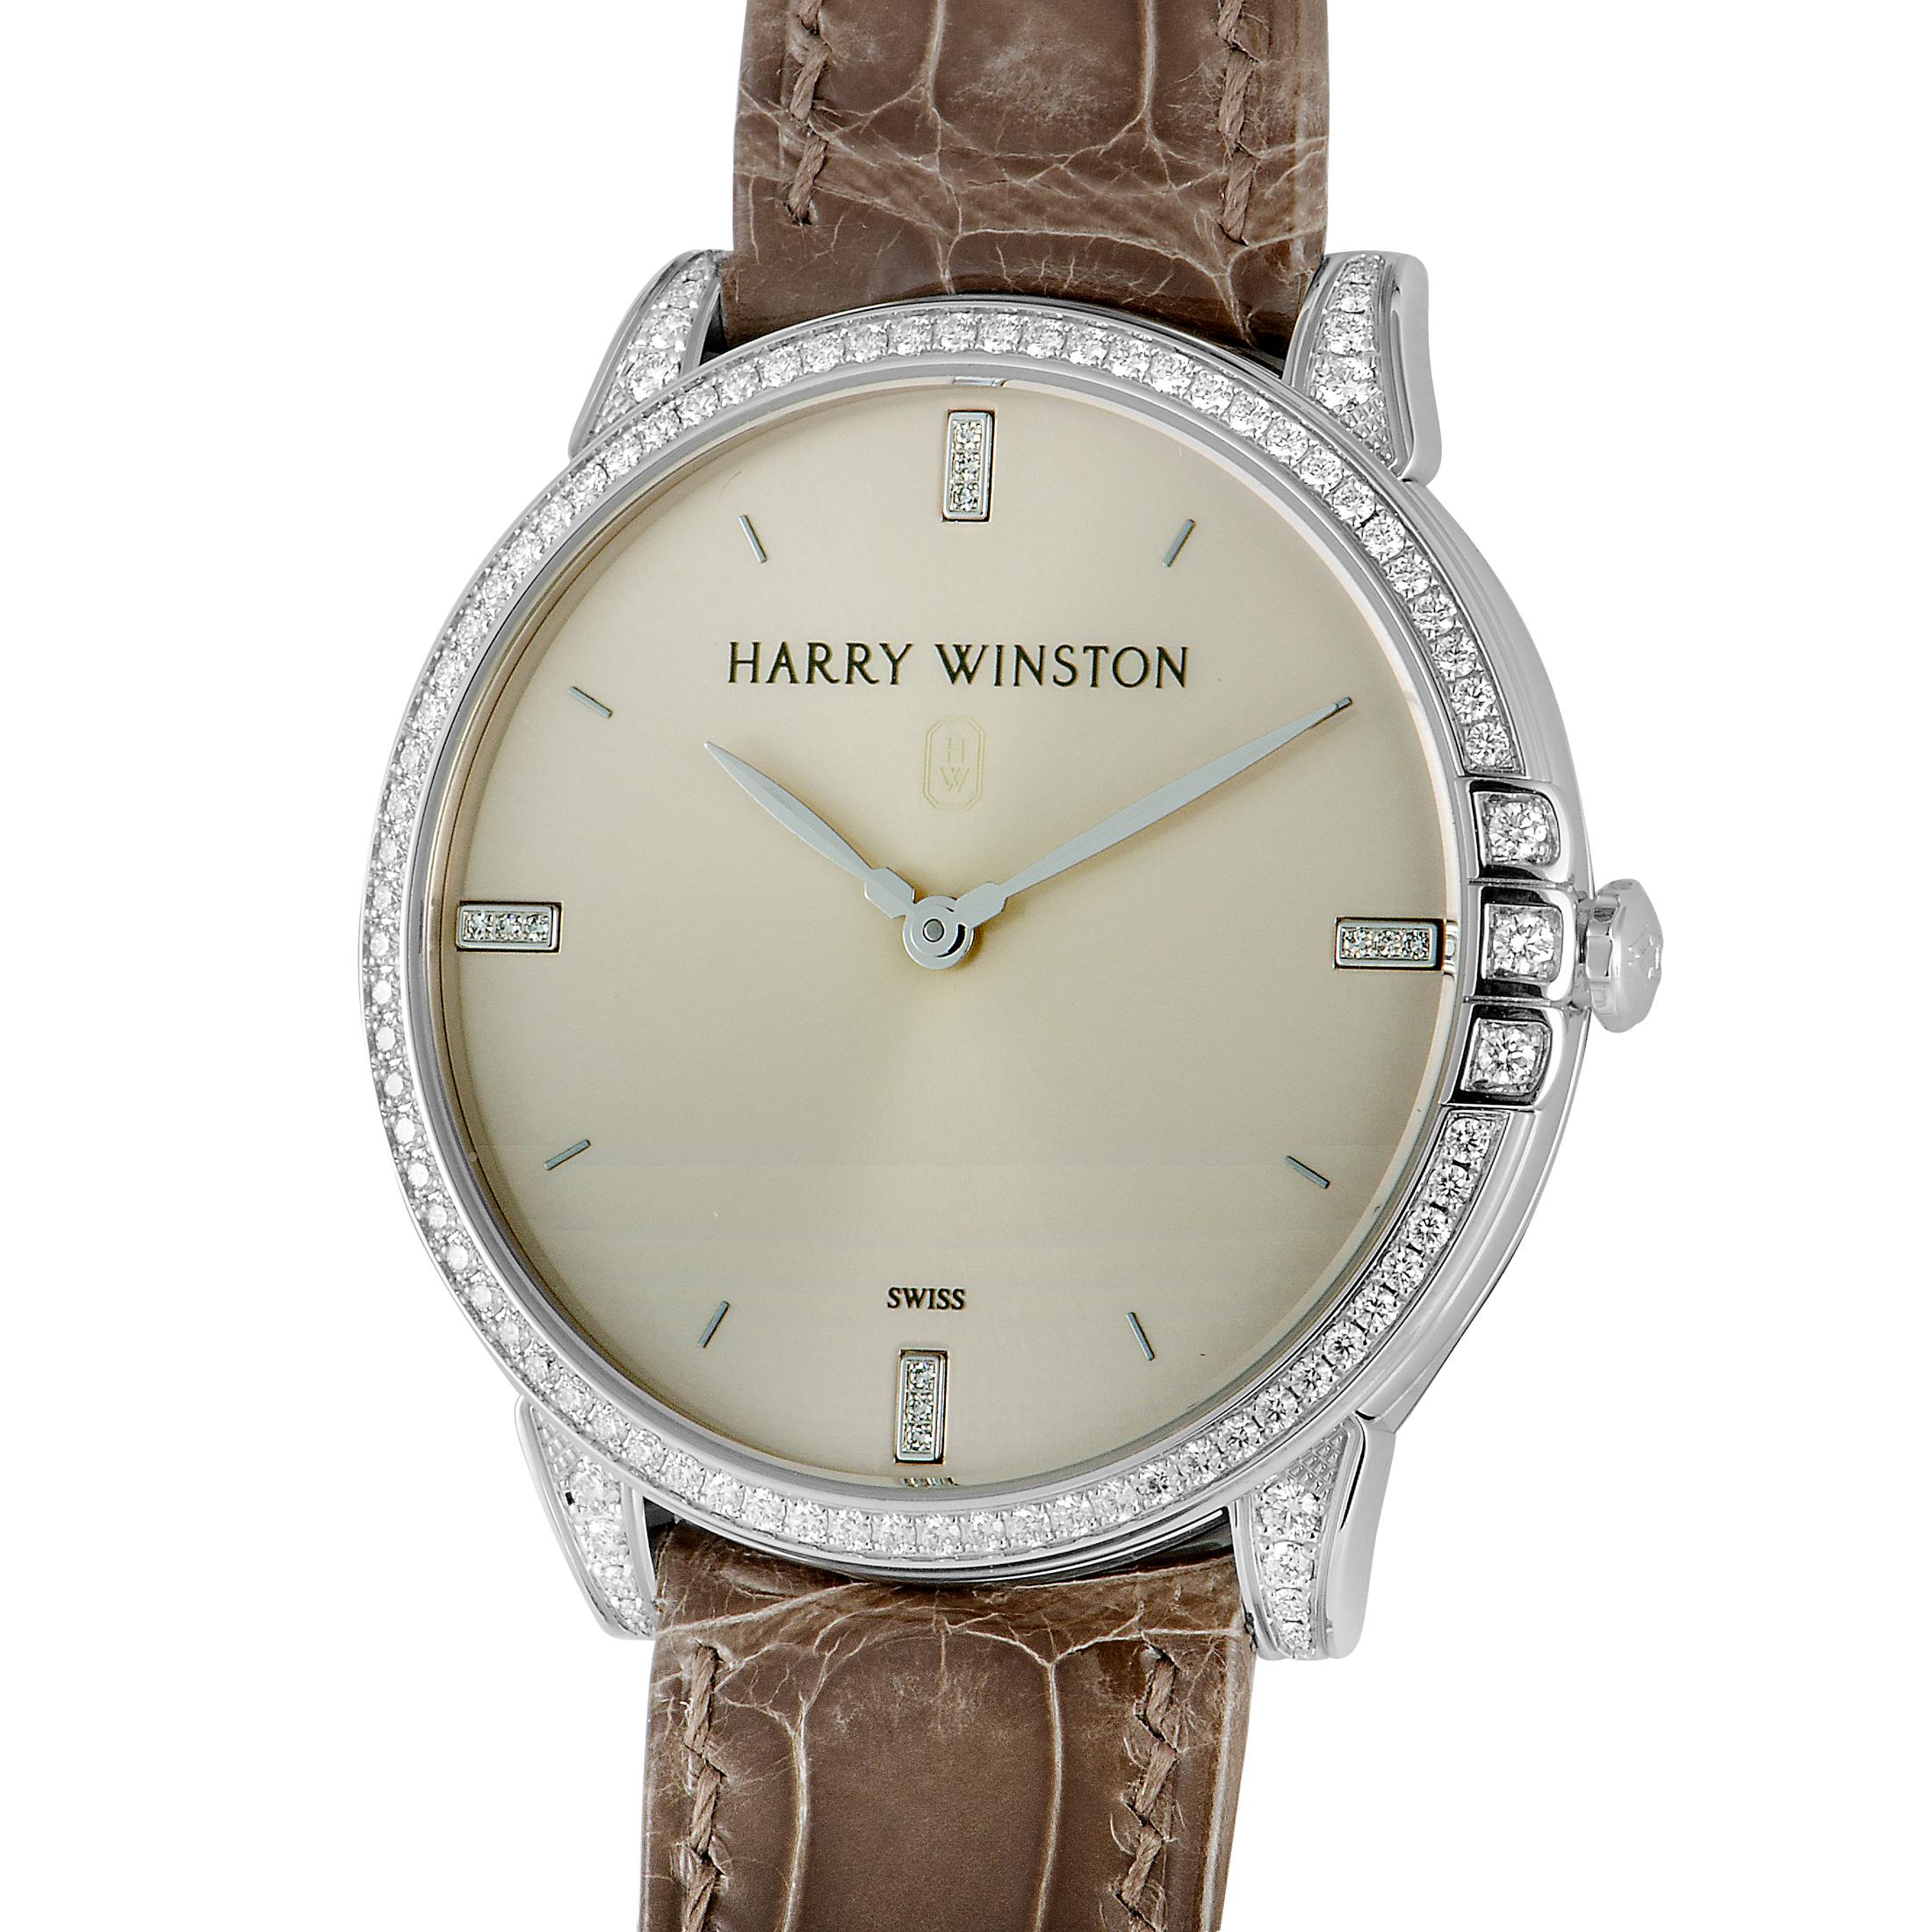 The Harry Winston Midnight 39 mm, reference number MIDQHM39WW002, is created for the sublime “Midnight” collection.

Presented on a taupe leather strap fitted with a tang buckle, the watch comes with a diamond-set 18K white gold case that has a